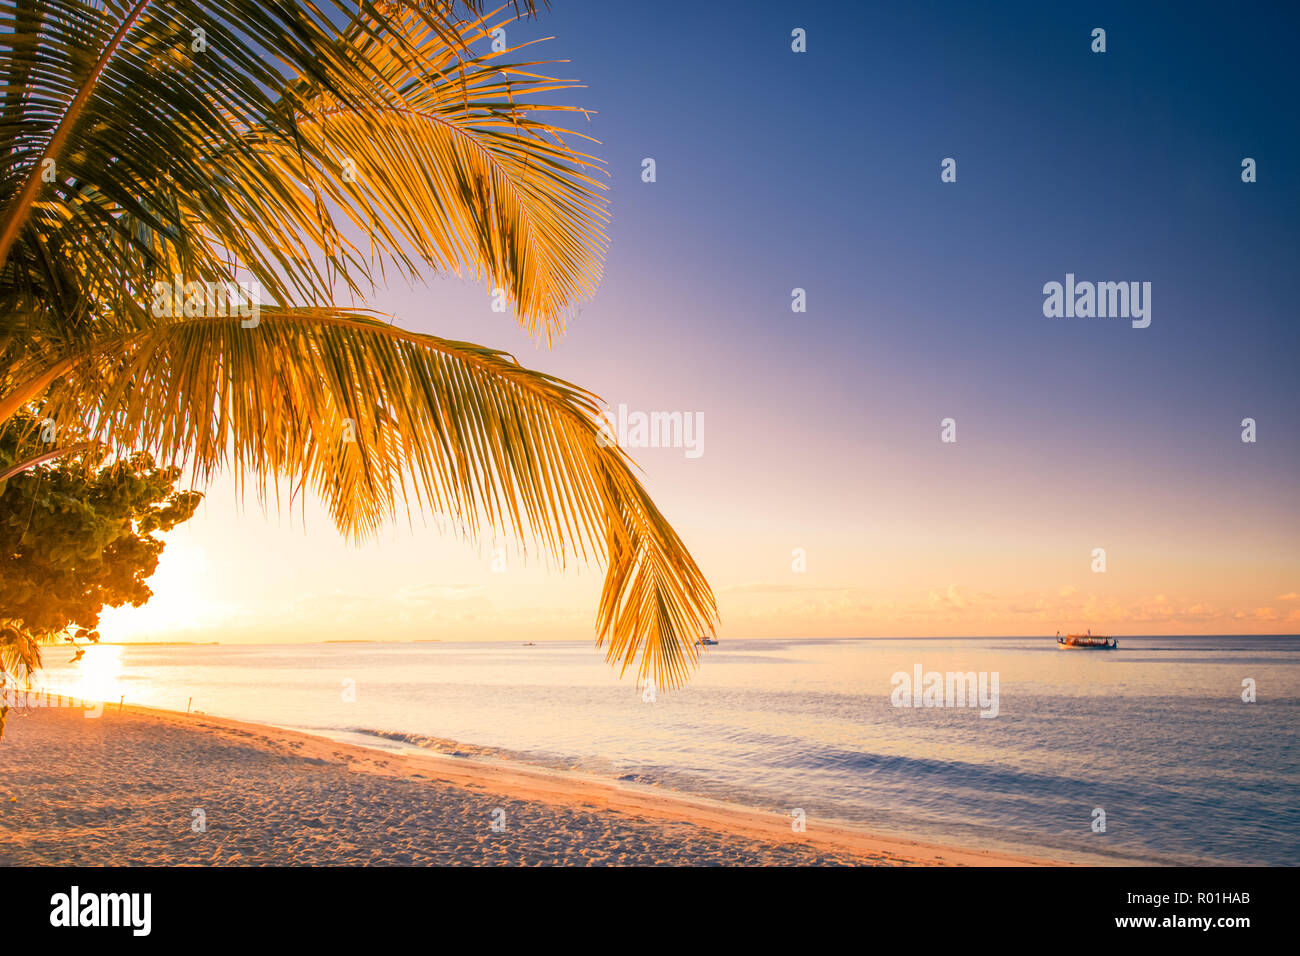 Beautiful sunset on the beach, palm leaves and calm sea view. Tranquil exotic landscape. Tropical beach background concept Stock Photo